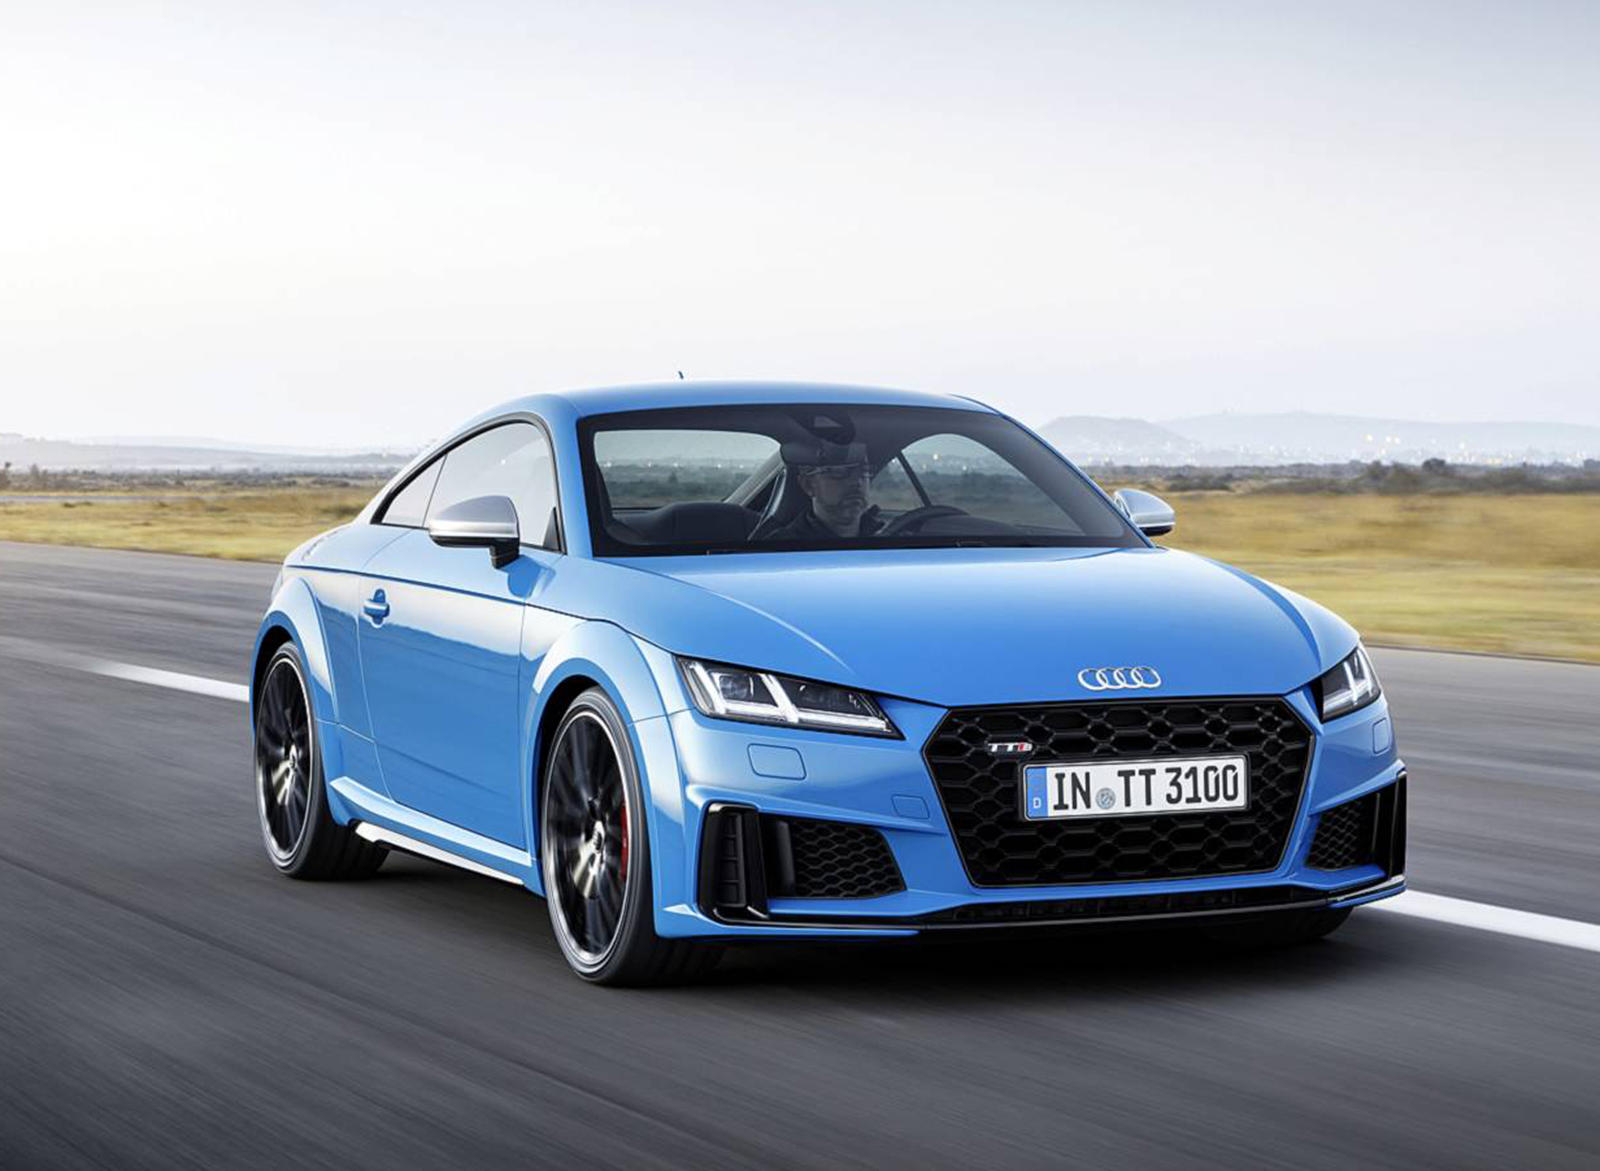 2019 Audi TT Arrives With Sportier Styling And New Special Editions - CarBuzz